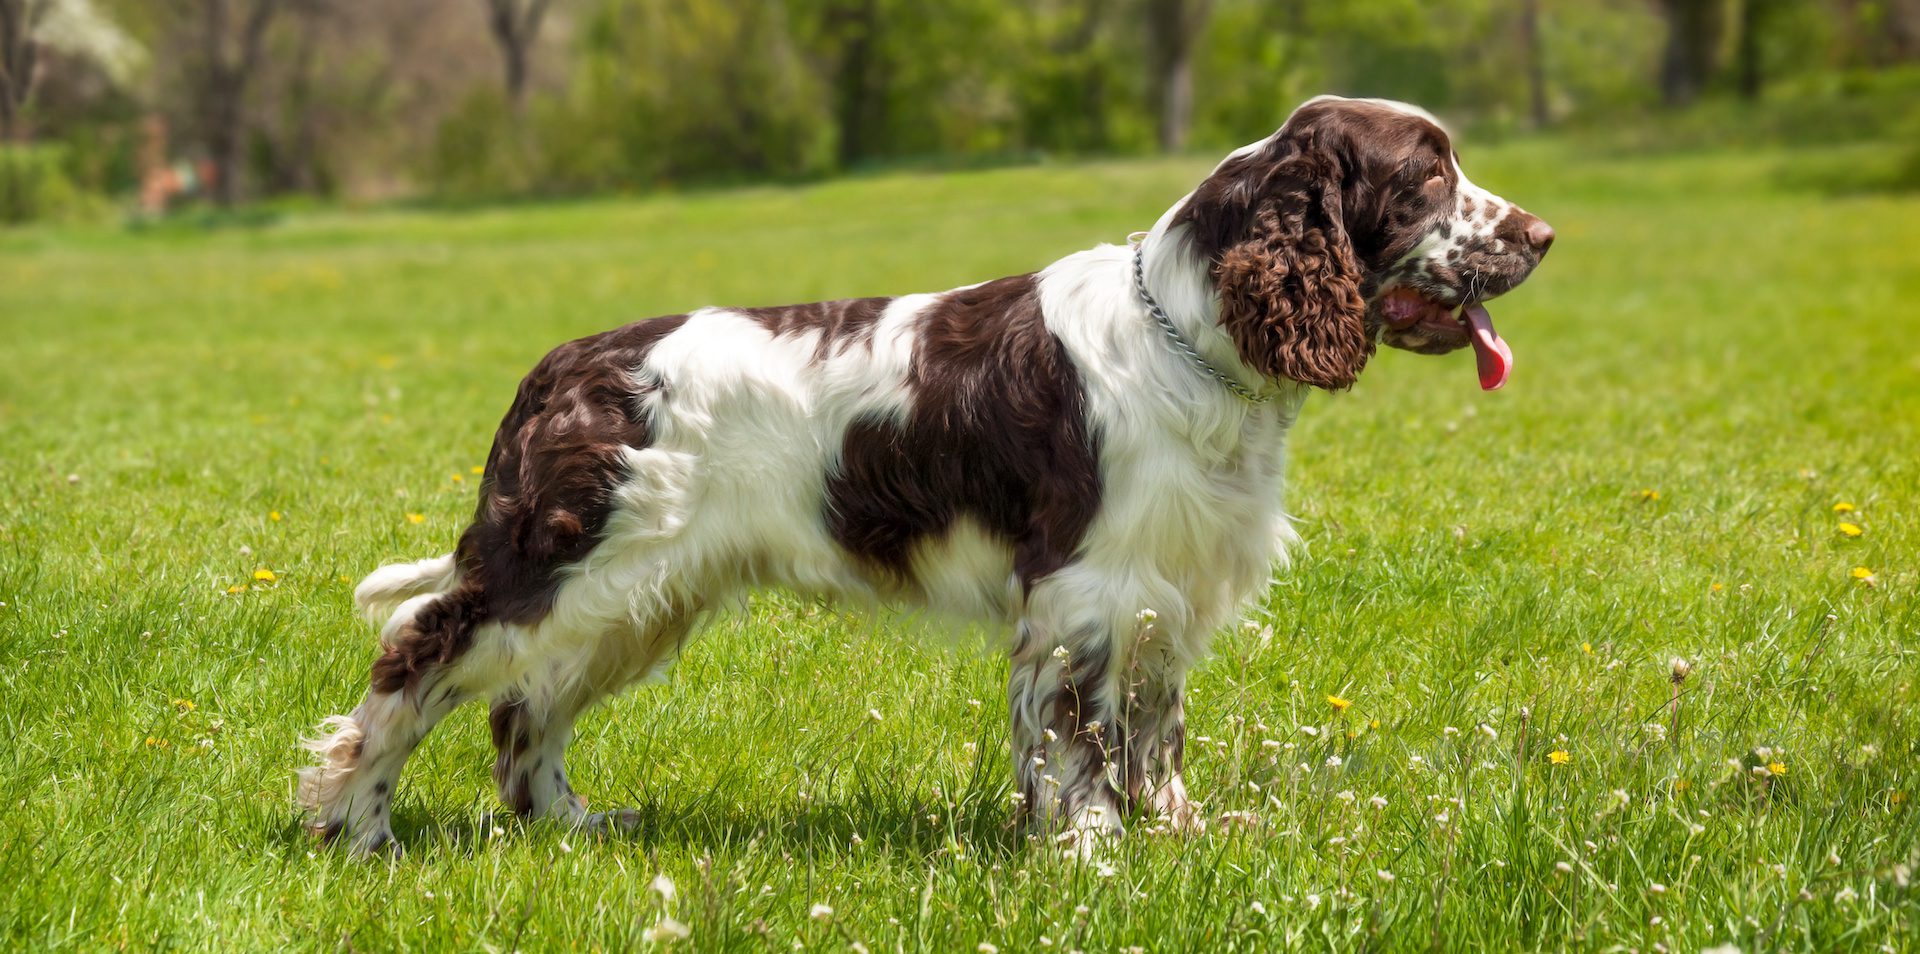 A Beautiful Dog Of Breed English Springer Spaniel Stands On A Green Lawn. Hunting Dog Breed.